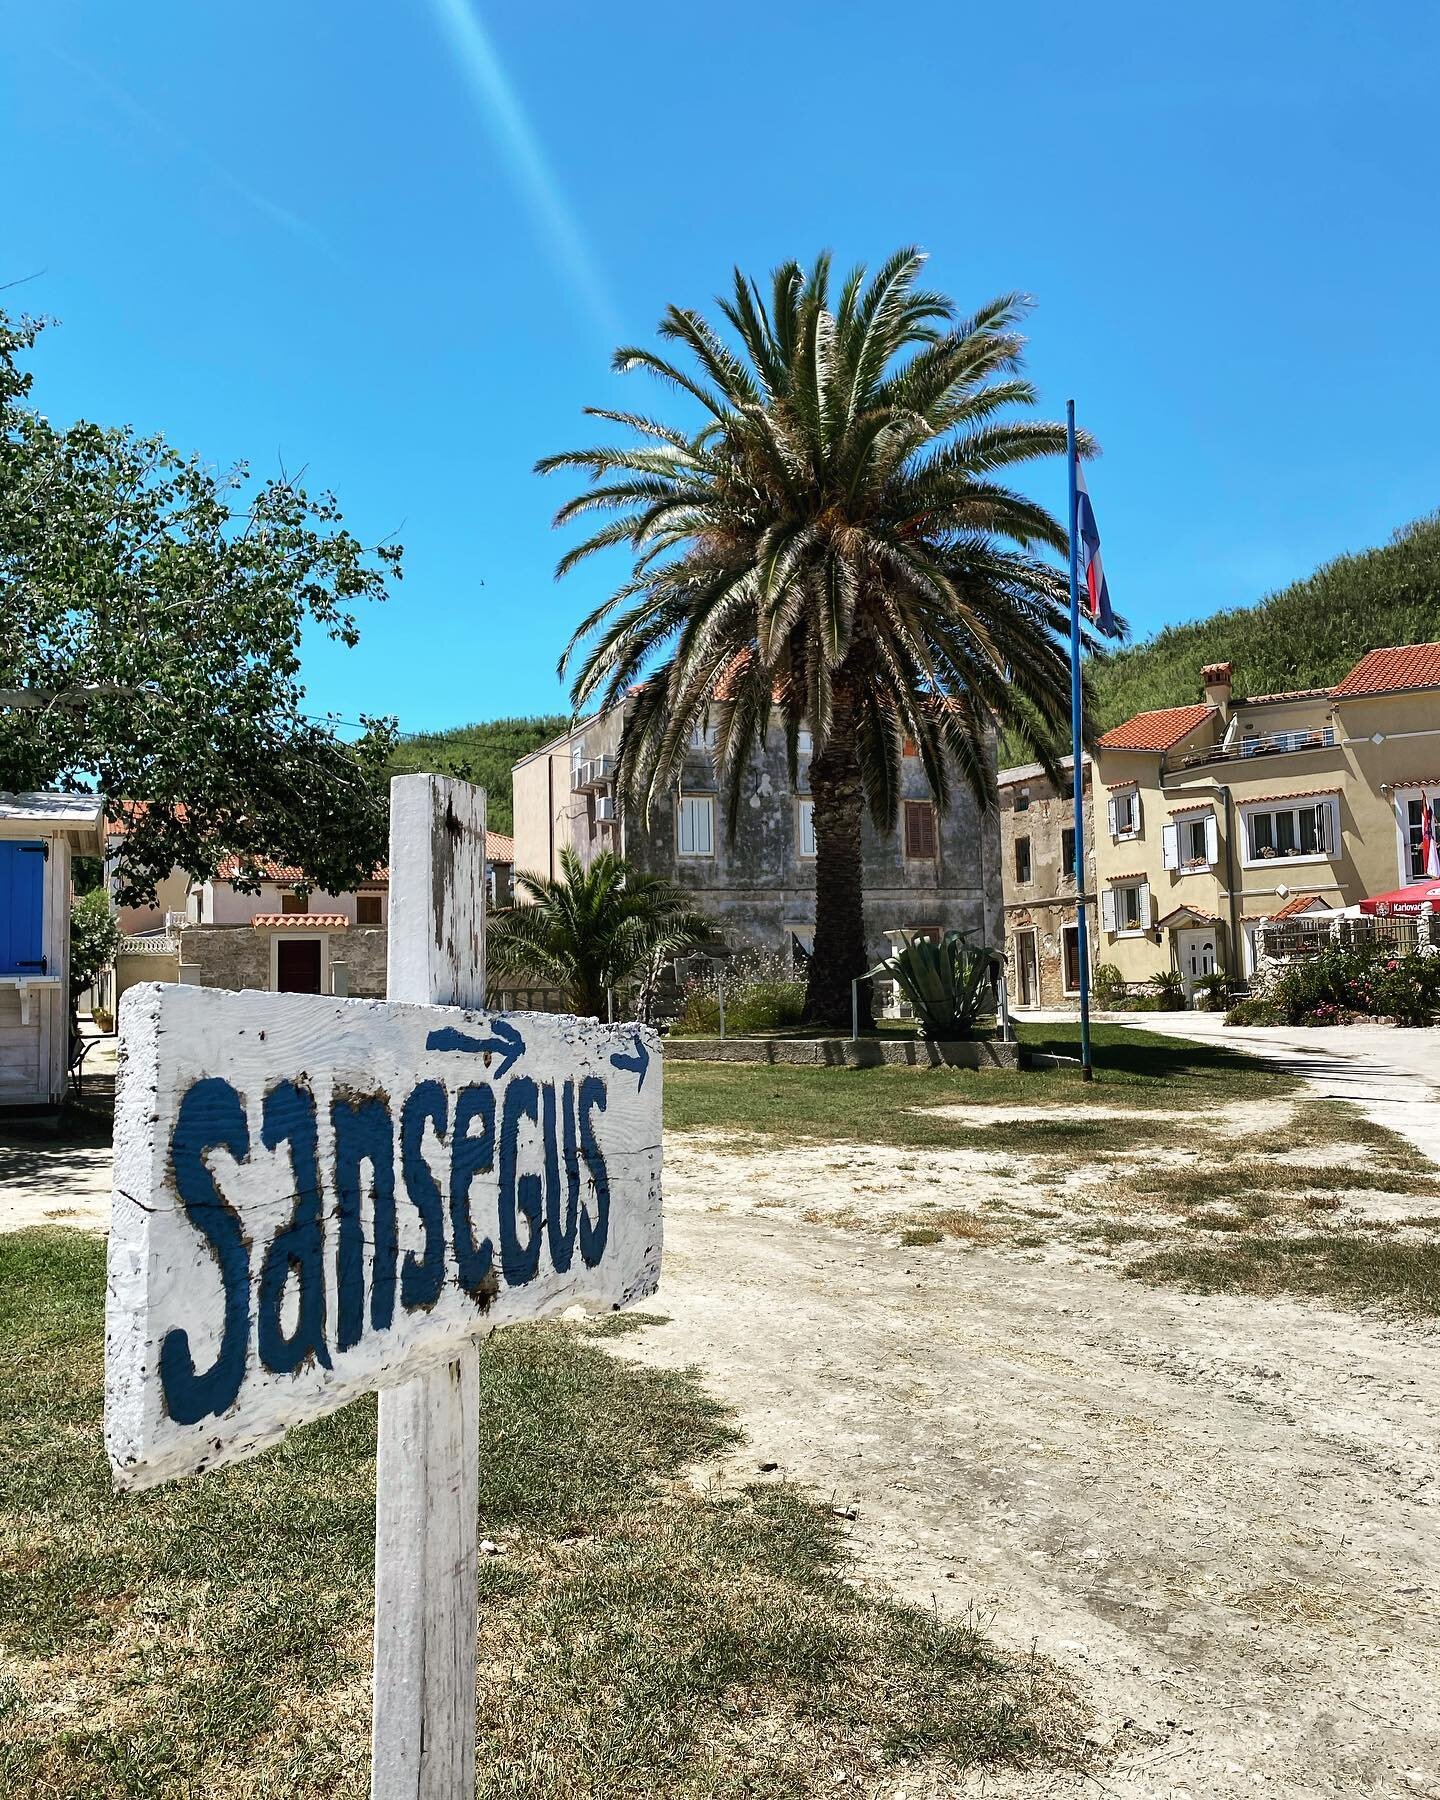 Welcome on board 🏝 

-Sansegus now offers a small market with fresh fruit and vegetables everyday by the school 🥦🍉🍌🍅

#visitsusak2021 #market #islandlife #naturalproduce #croatiafulloflife